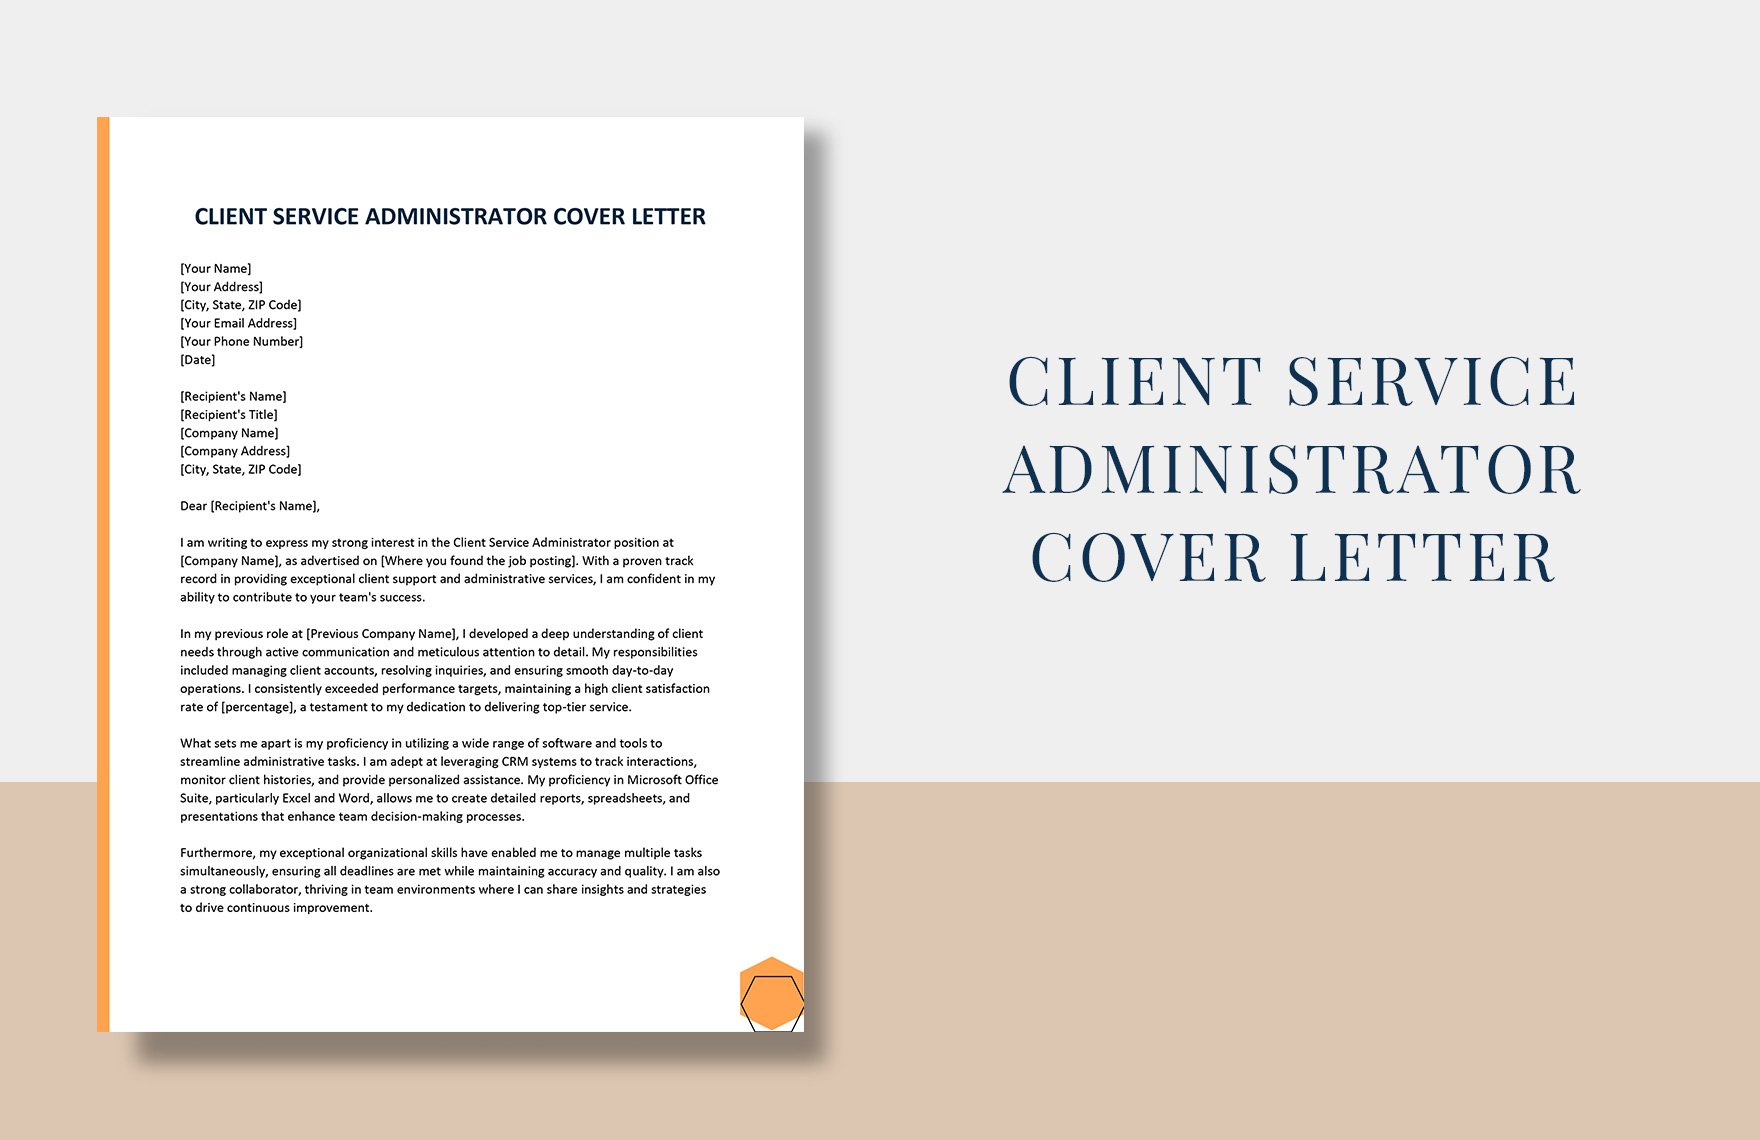 Client Service Administrator Cover Letter